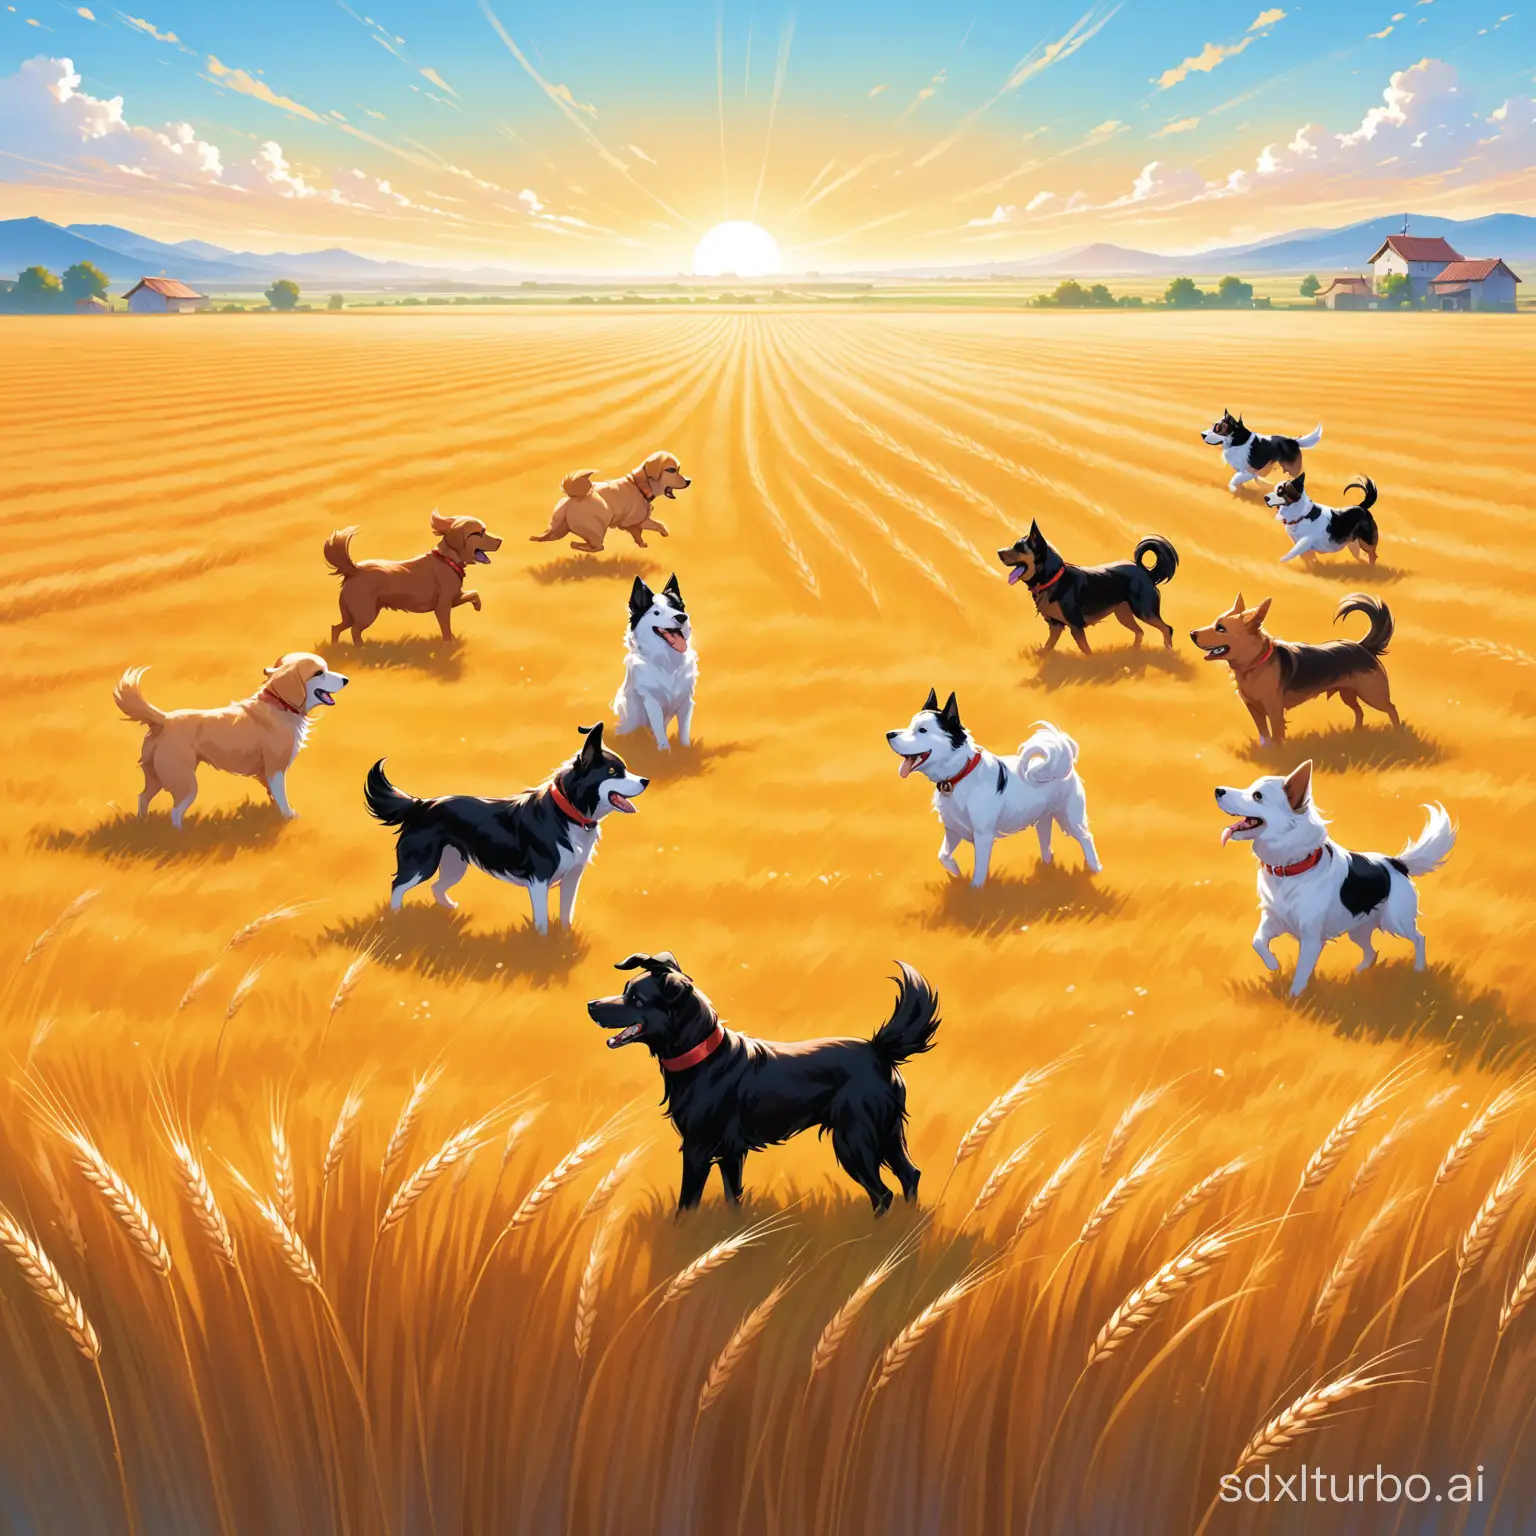 Seven or eight dogs of different breeds are happily playing in the small garden, with endless wheat fields in the distance.